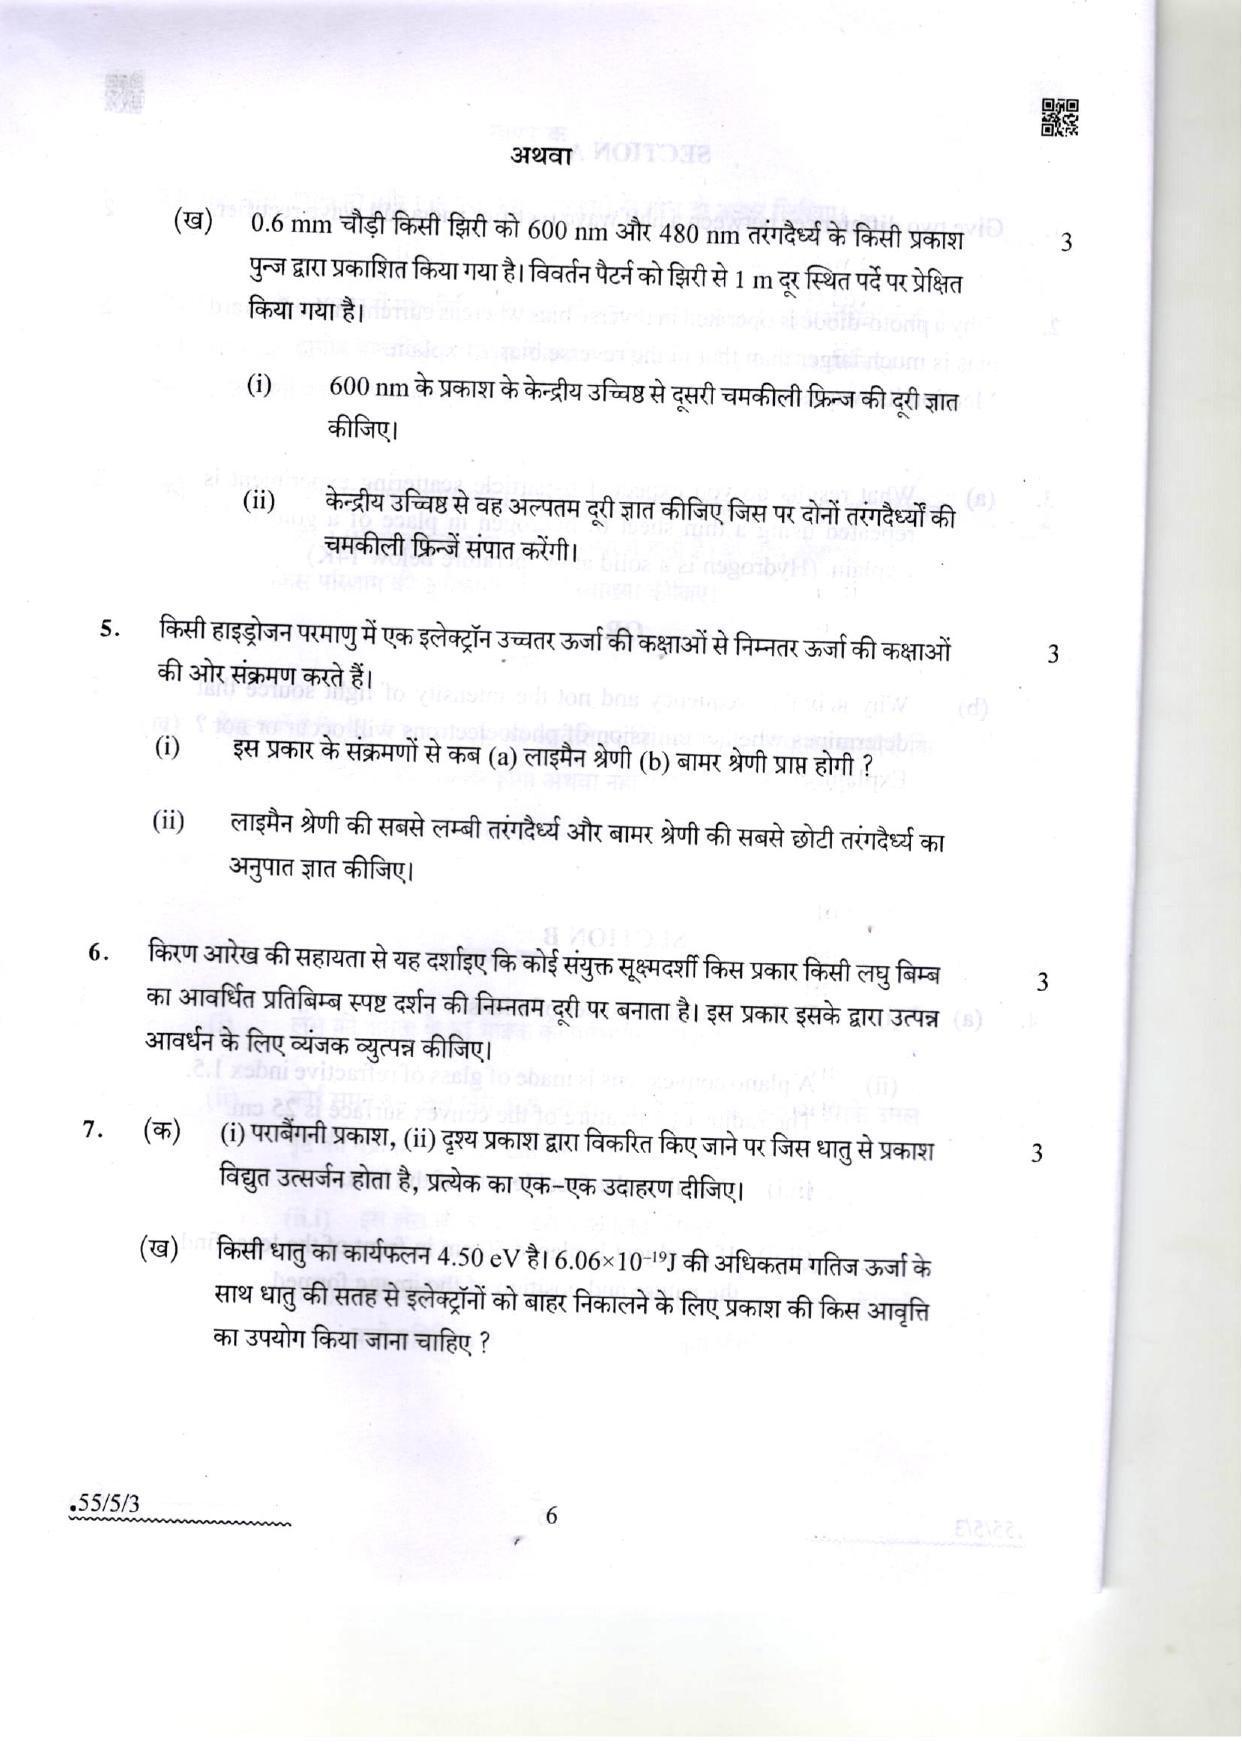 CBSE Class 12 55-5-3 Physics 2022 Question Paper - Page 6